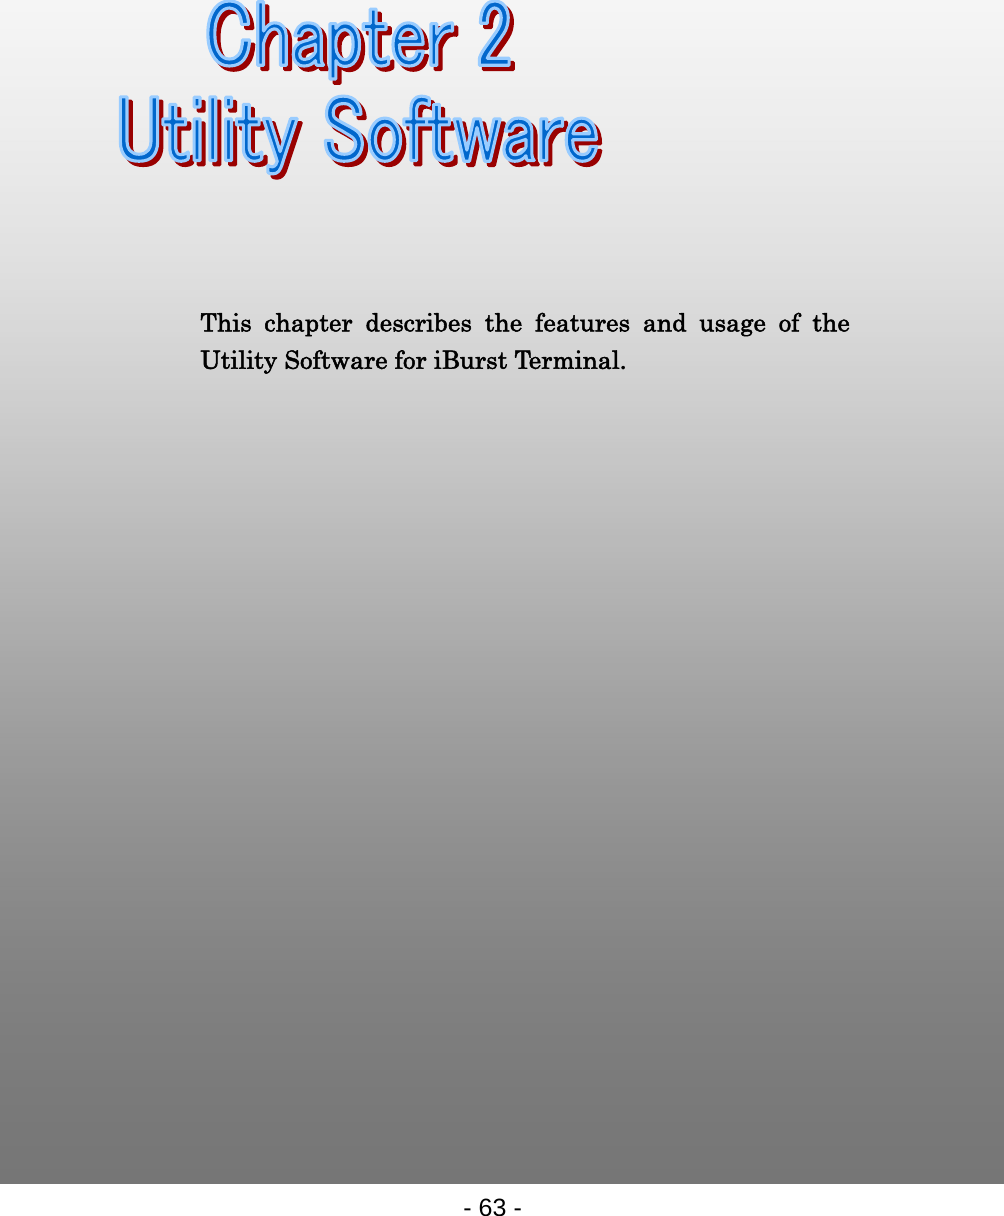       Chapter 2 Utility Software                                This chapter describes the features and usage of the Utility Software for iBurst Terminal. - 63 -  